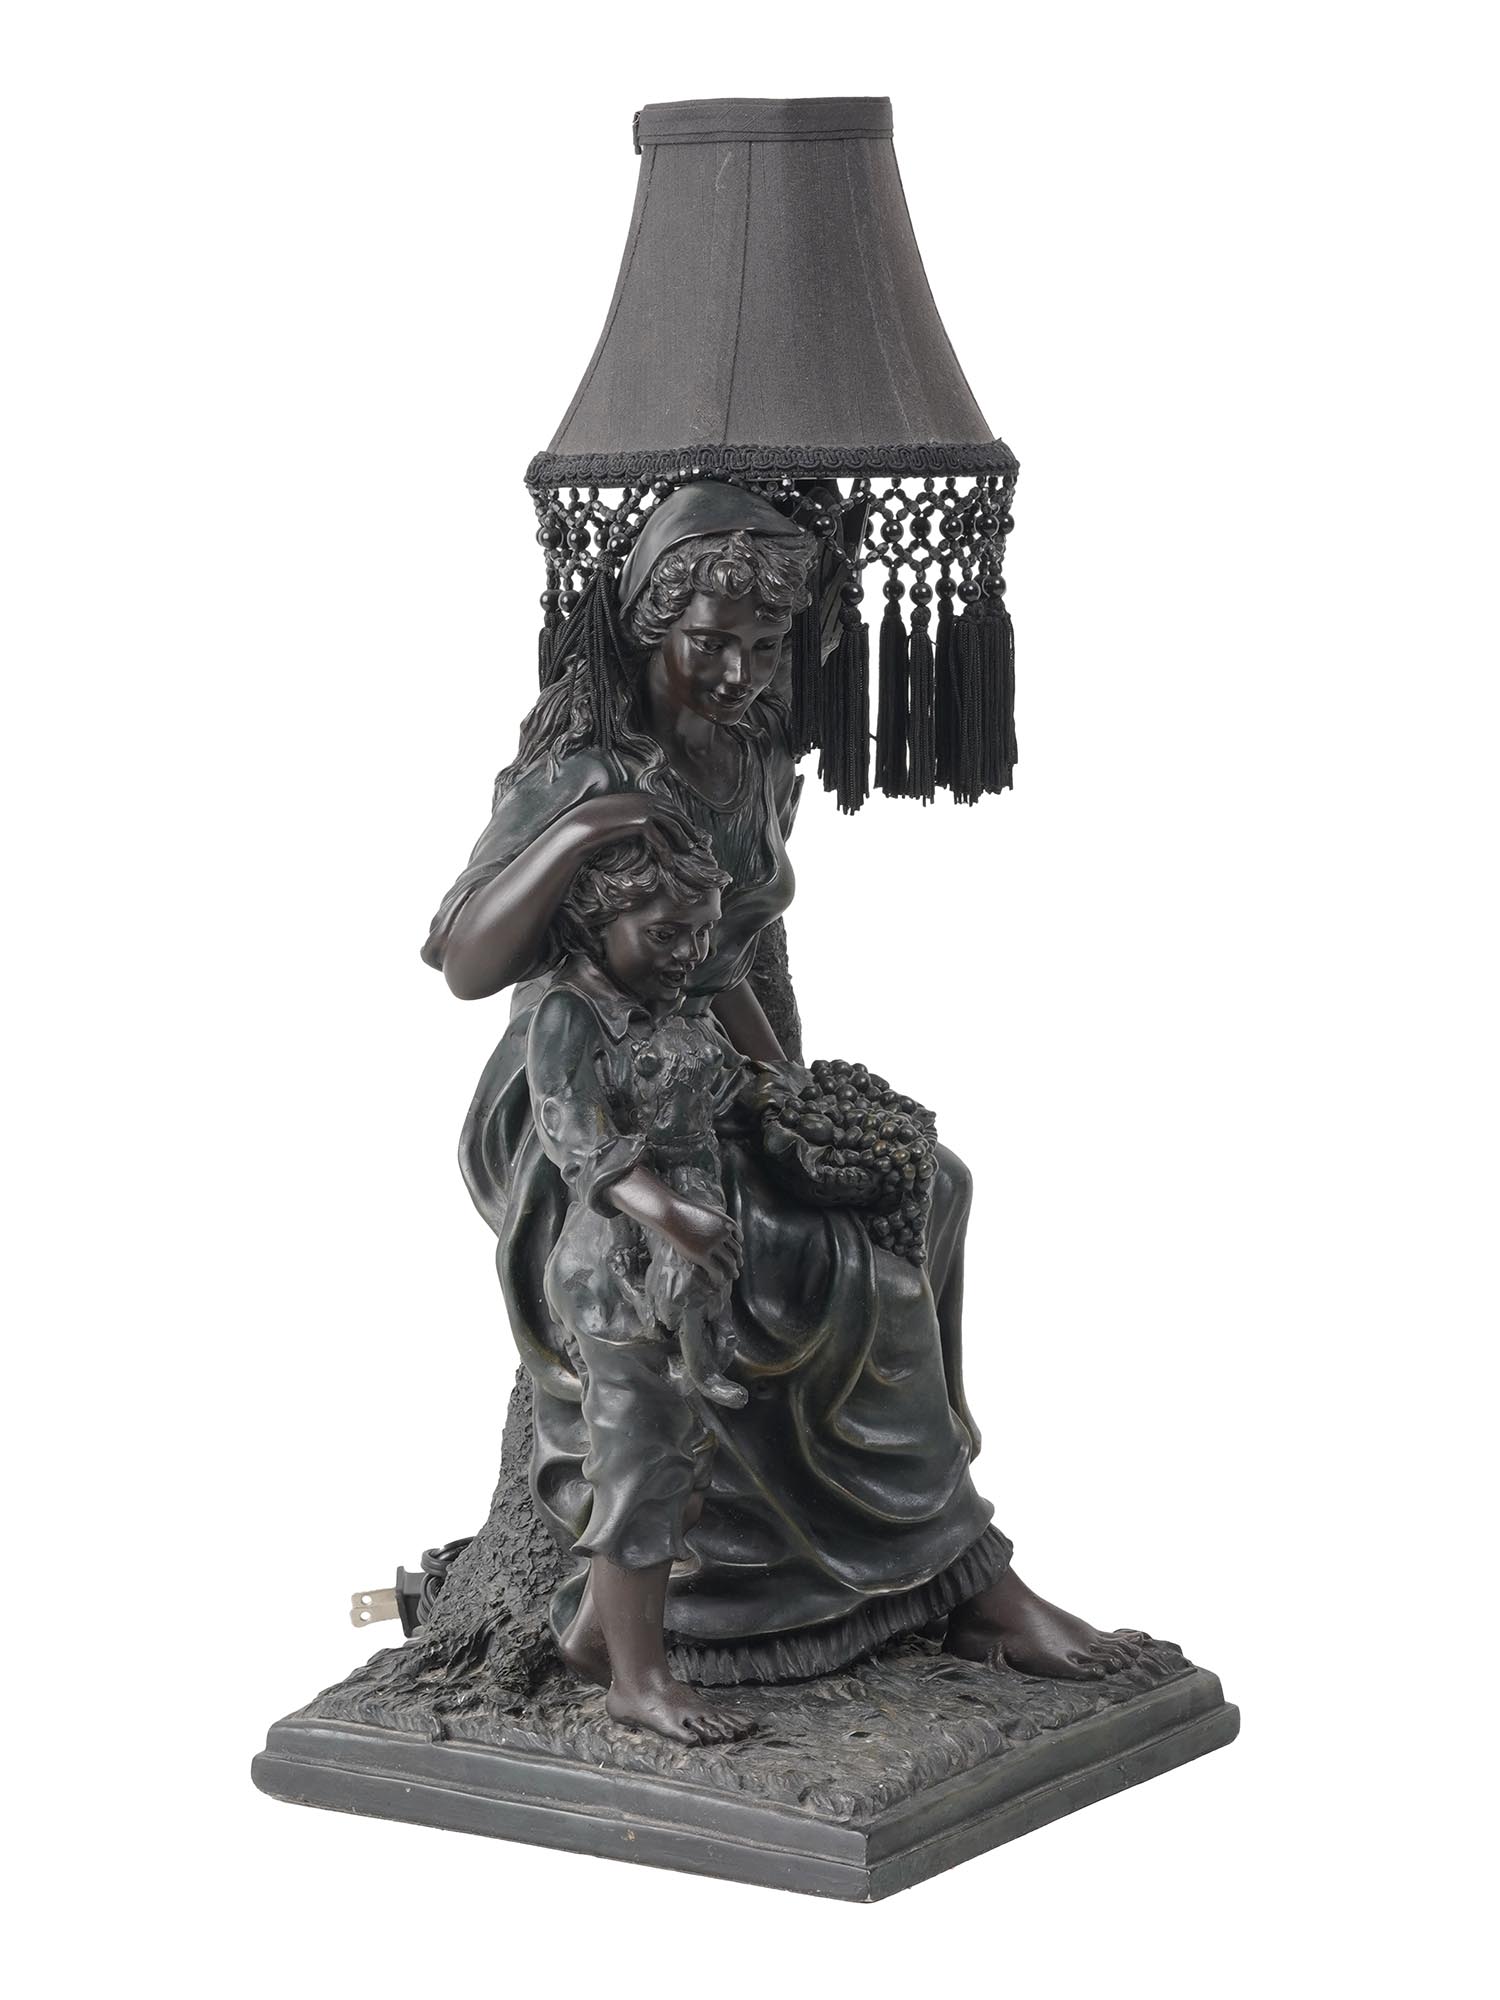 BLACK SCULPTURAL TABLE LAMP MOTHER WITH CHILD PIC-2